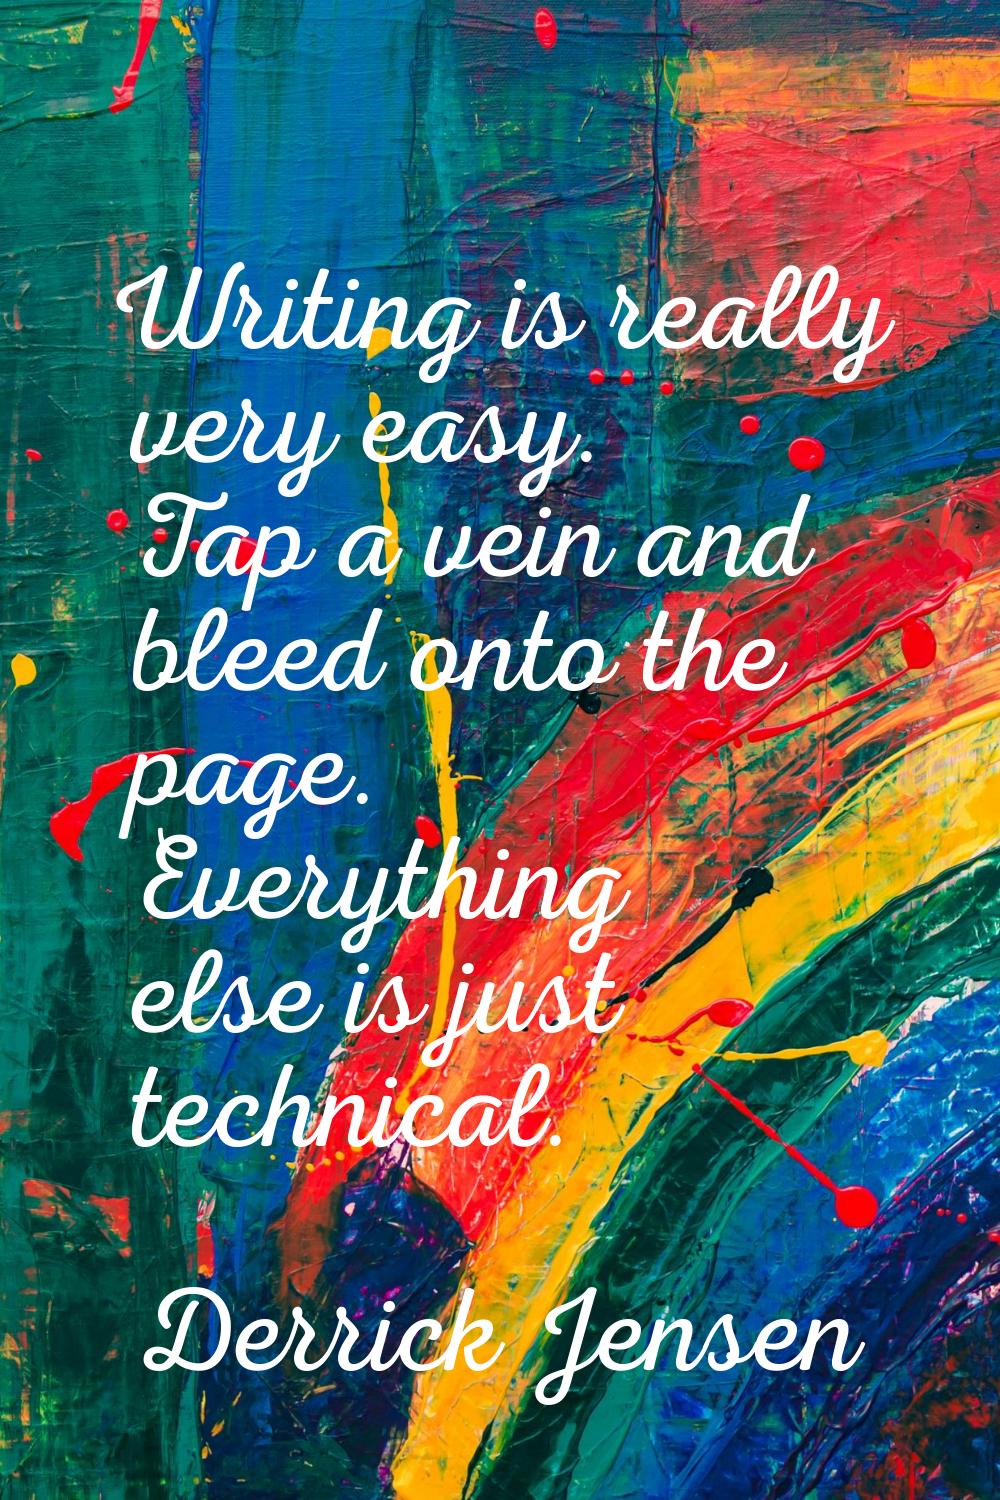 Writing is really very easy. Tap a vein and bleed onto the page. Everything else is just technical.